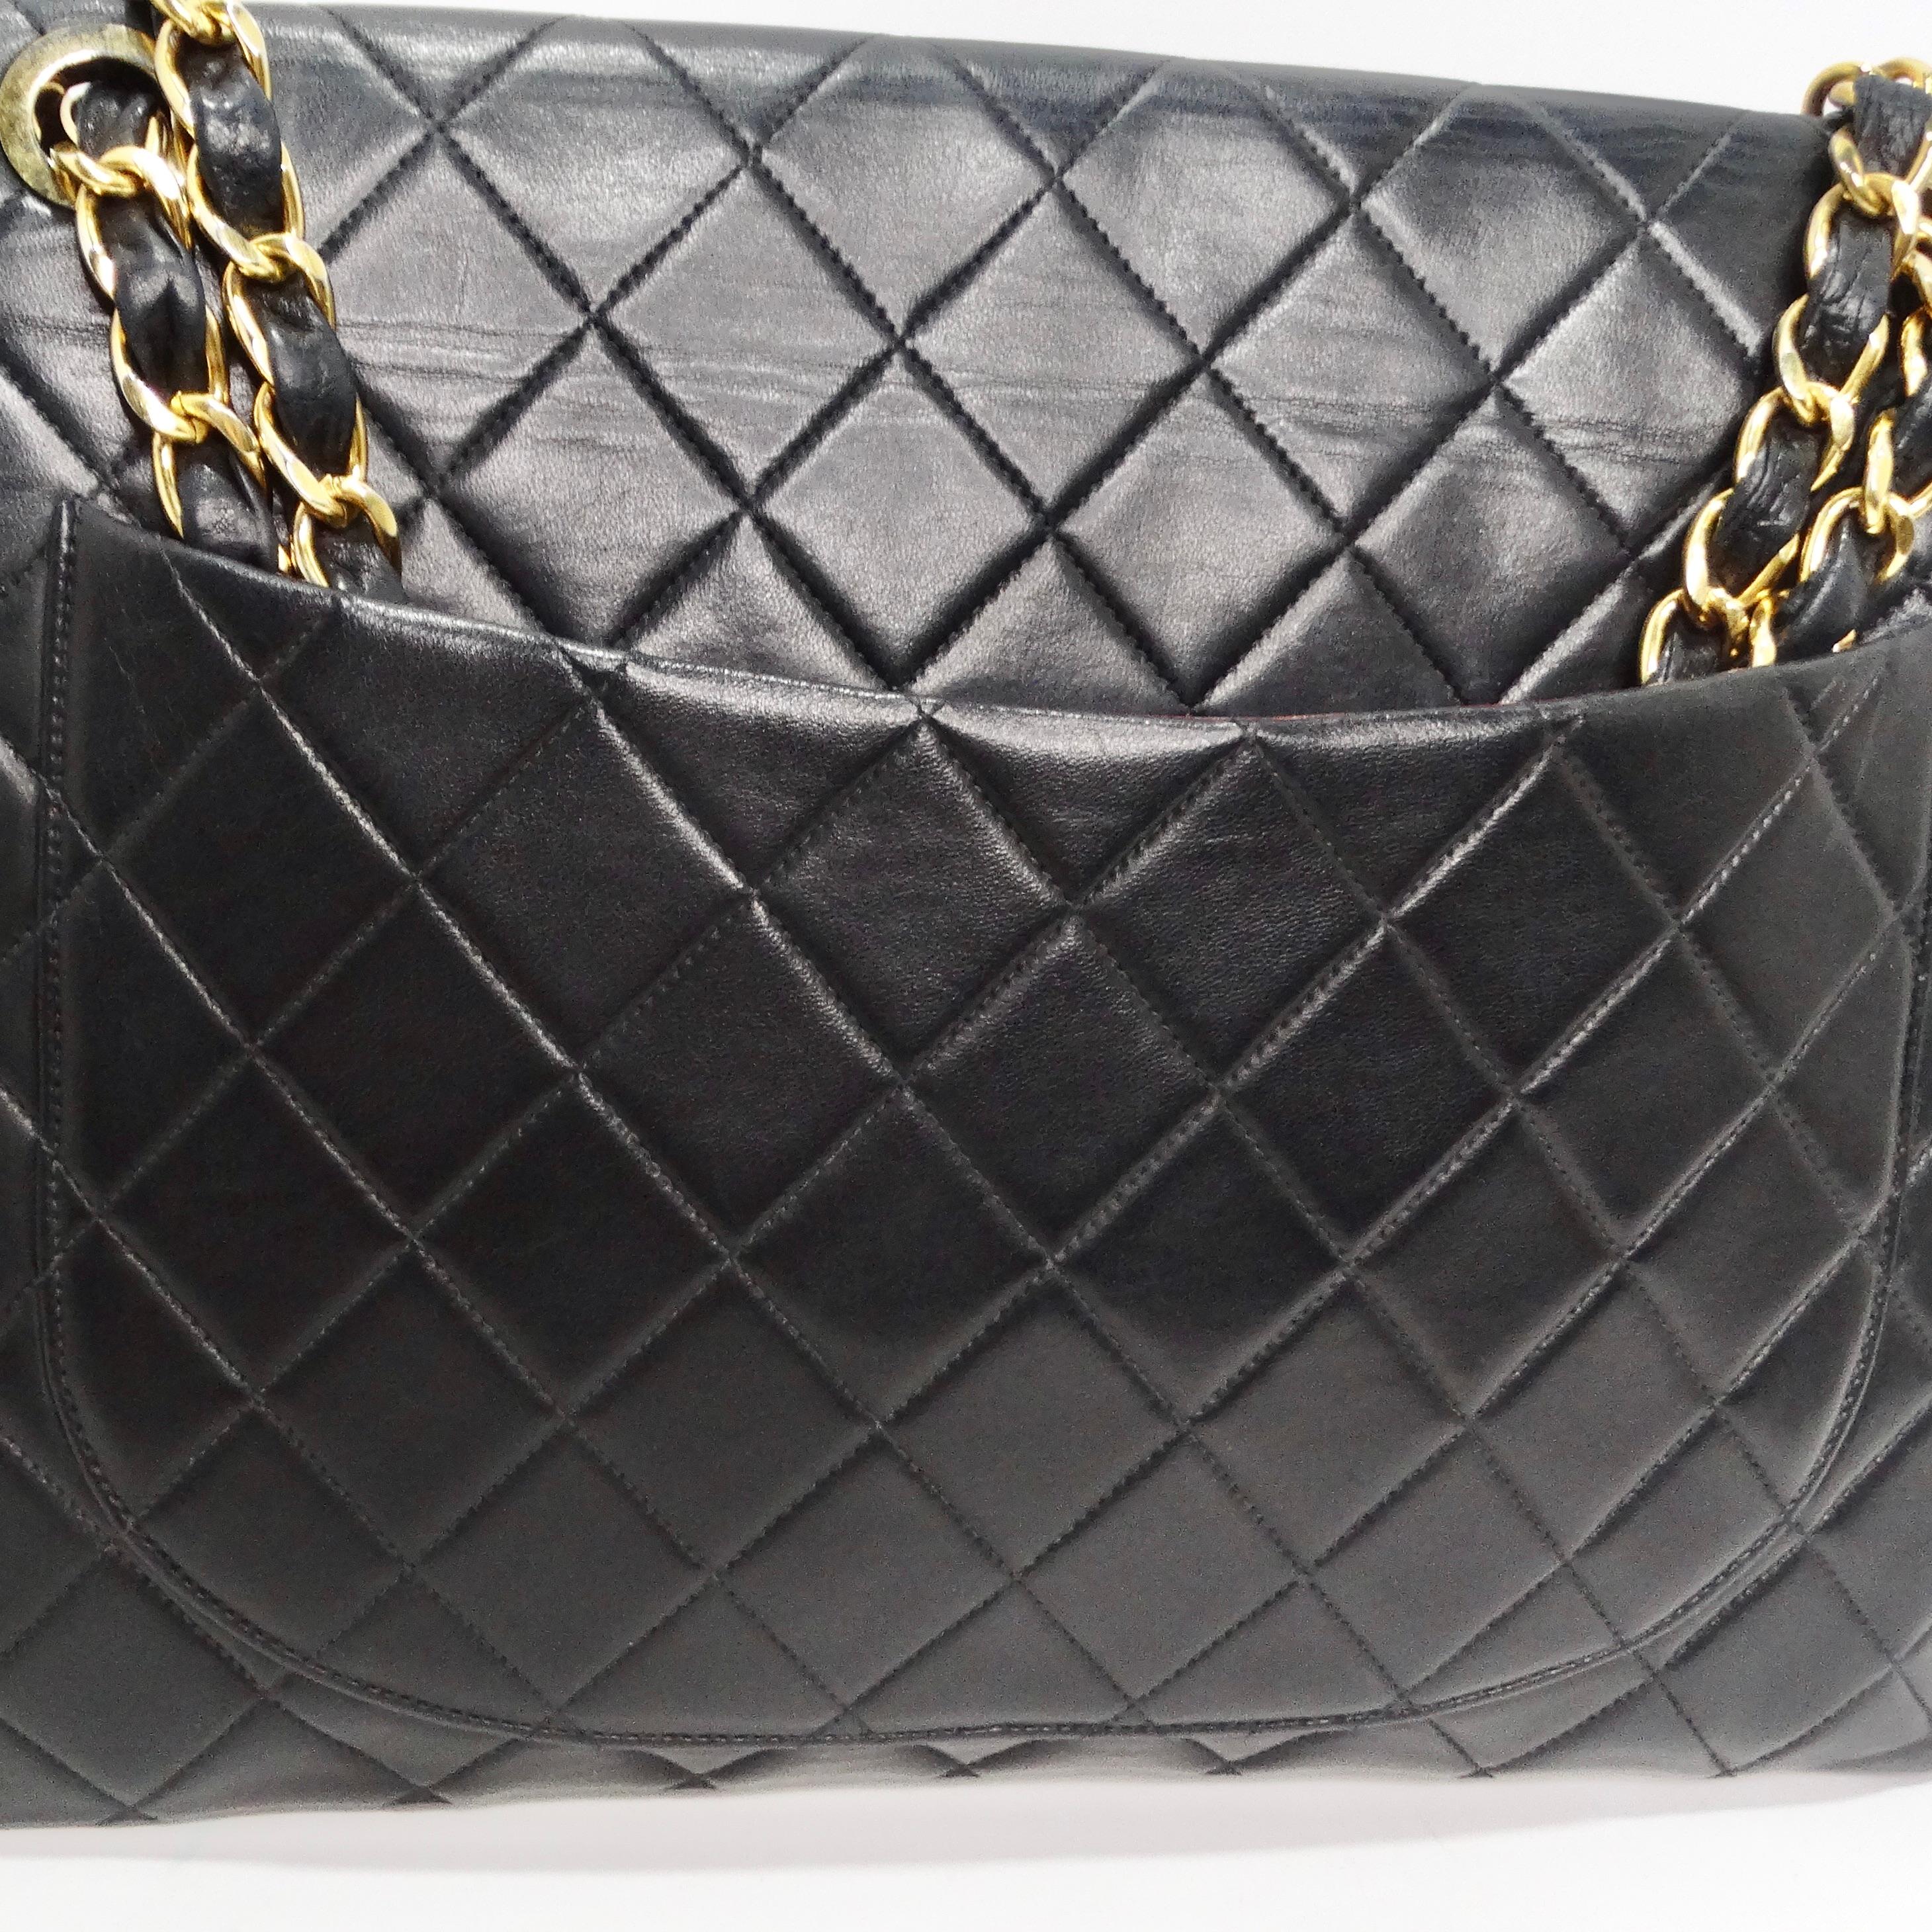 Chanel 1980s Classic Black Leather Maxi Single Flap Handtasche im Angebot 2